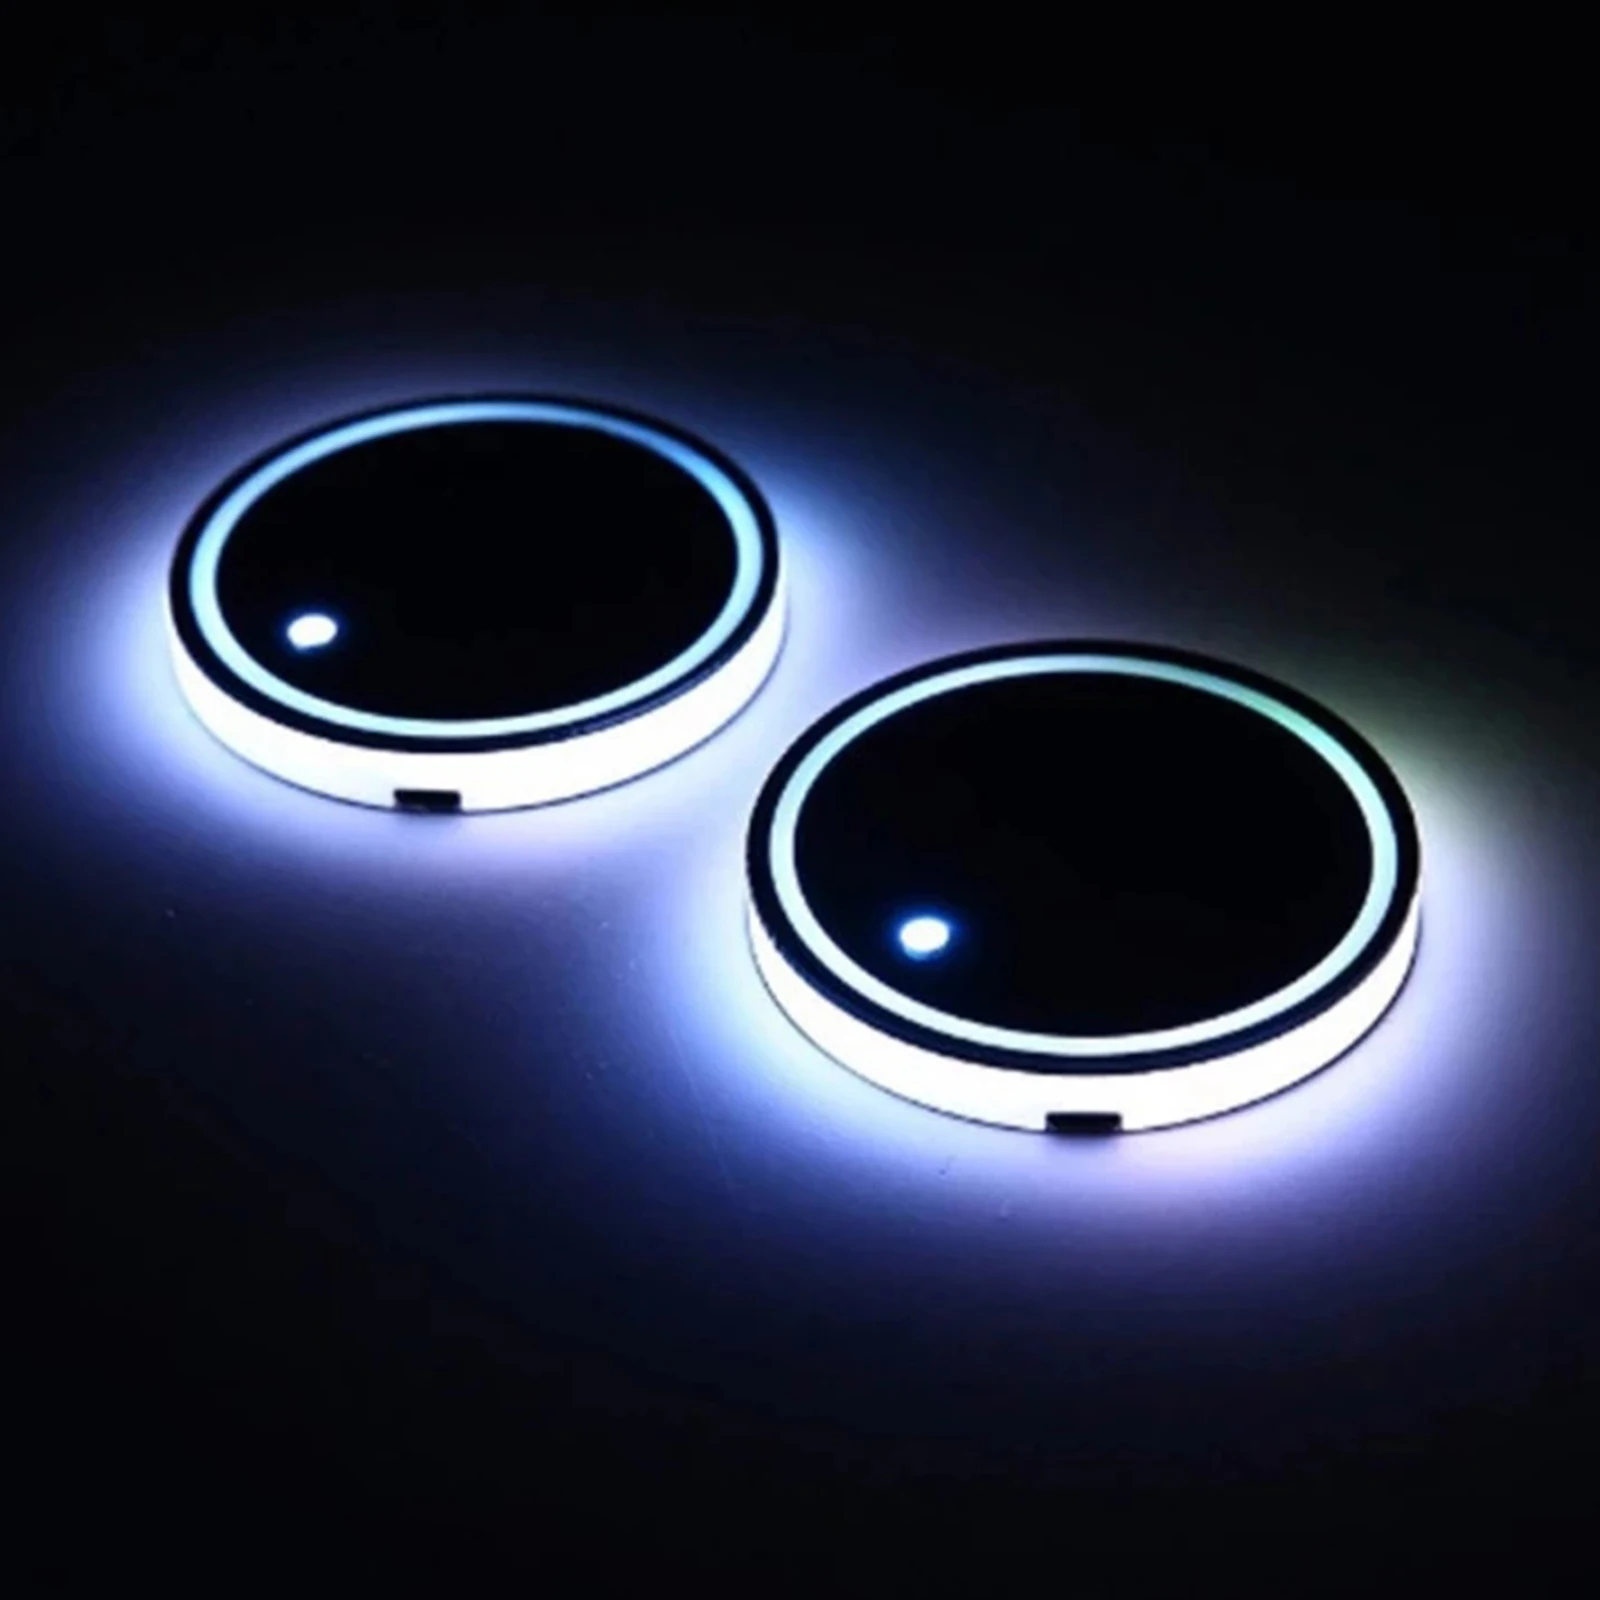 LED Car Cup Holder Lights Coaster with 7 Colors Changing USB Charging Mat